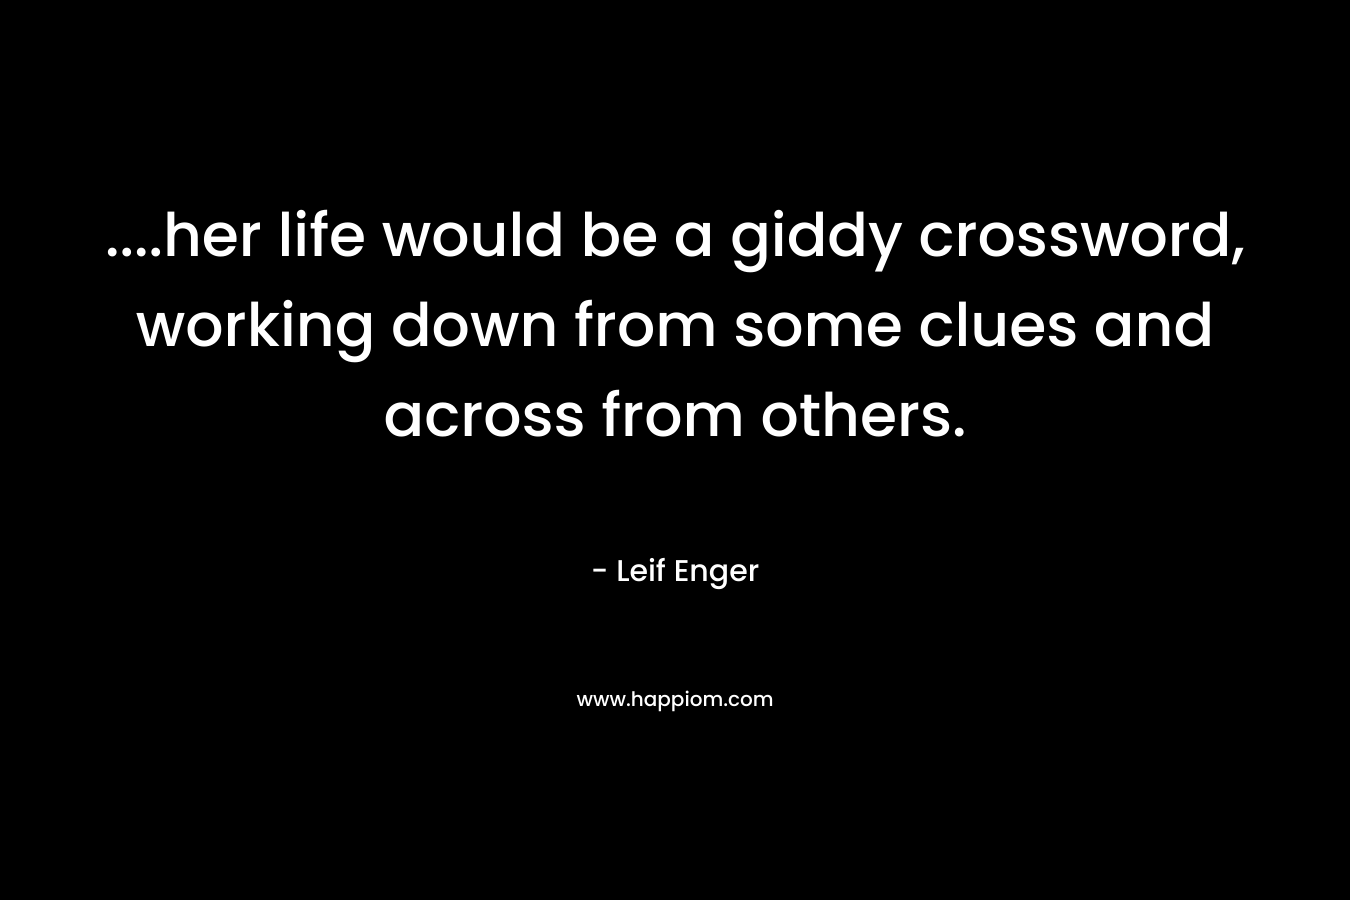 ….her life would be a giddy crossword, working down from some clues and across from others. – Leif Enger